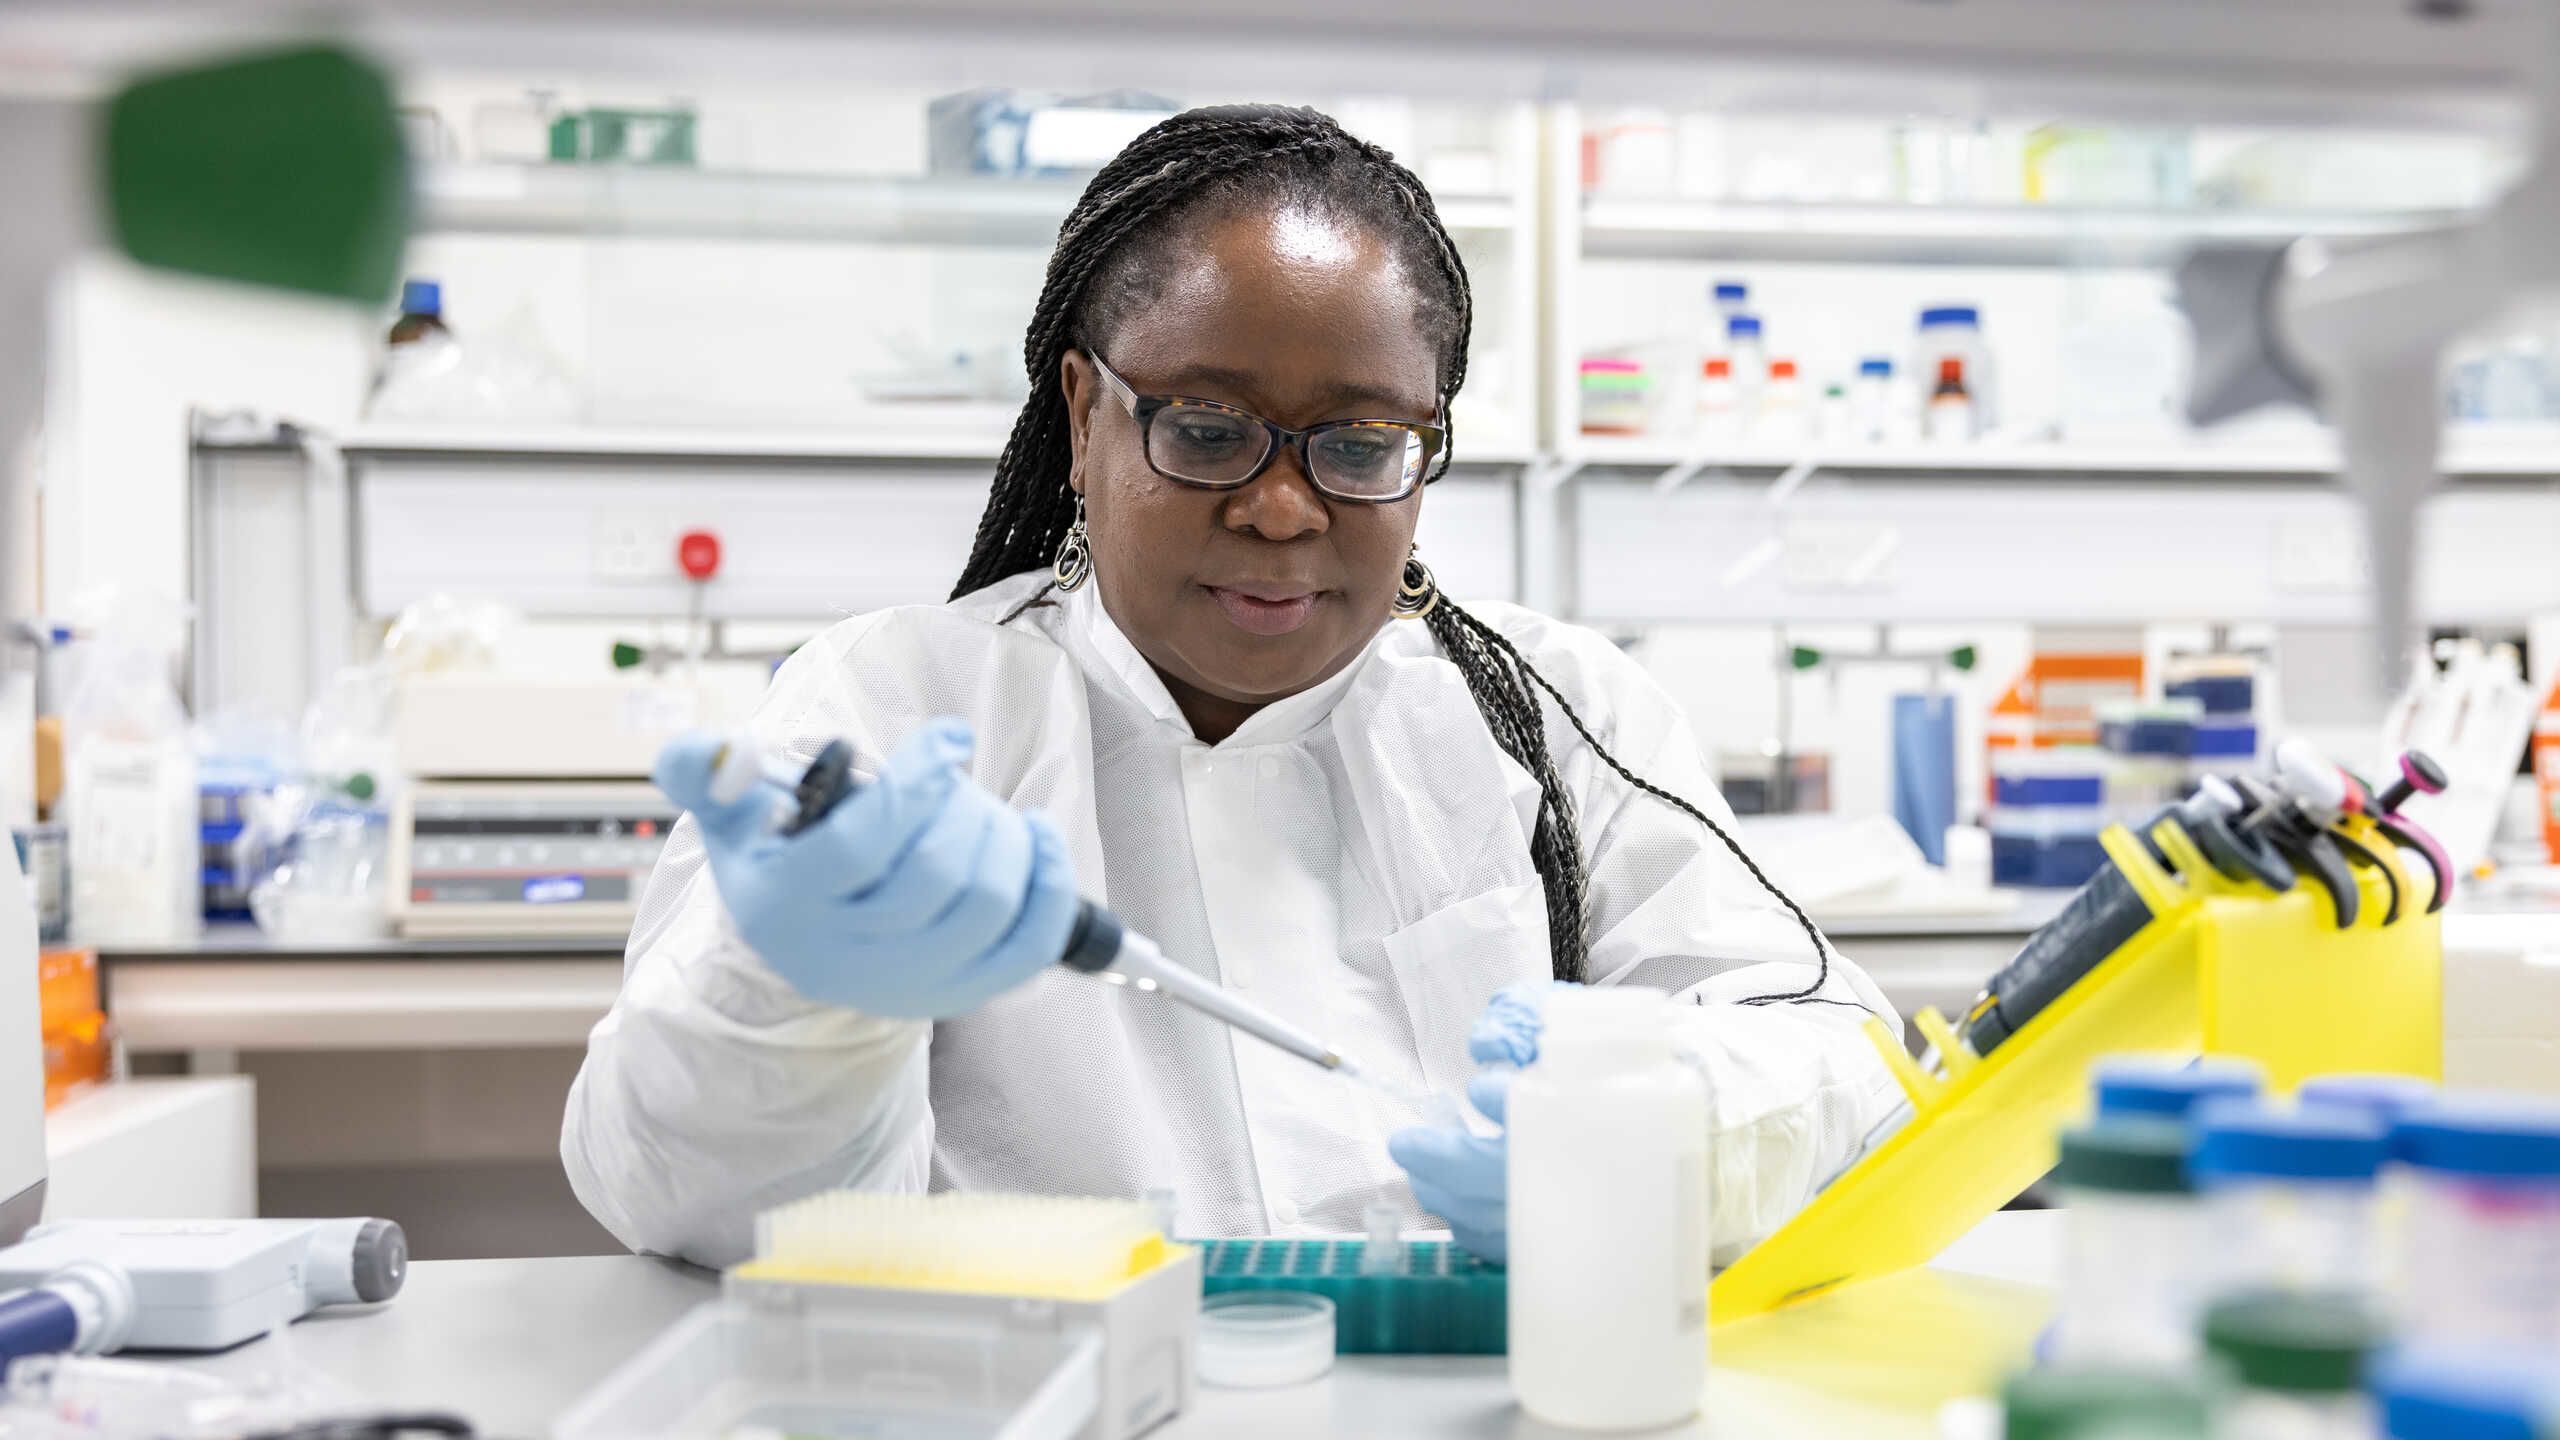 Dr Catherine Kibirige in the Department of Infectious Disease at the Chelsea and Westminster Hospital. She wears a white lab coat and holds a pipette in one hand.